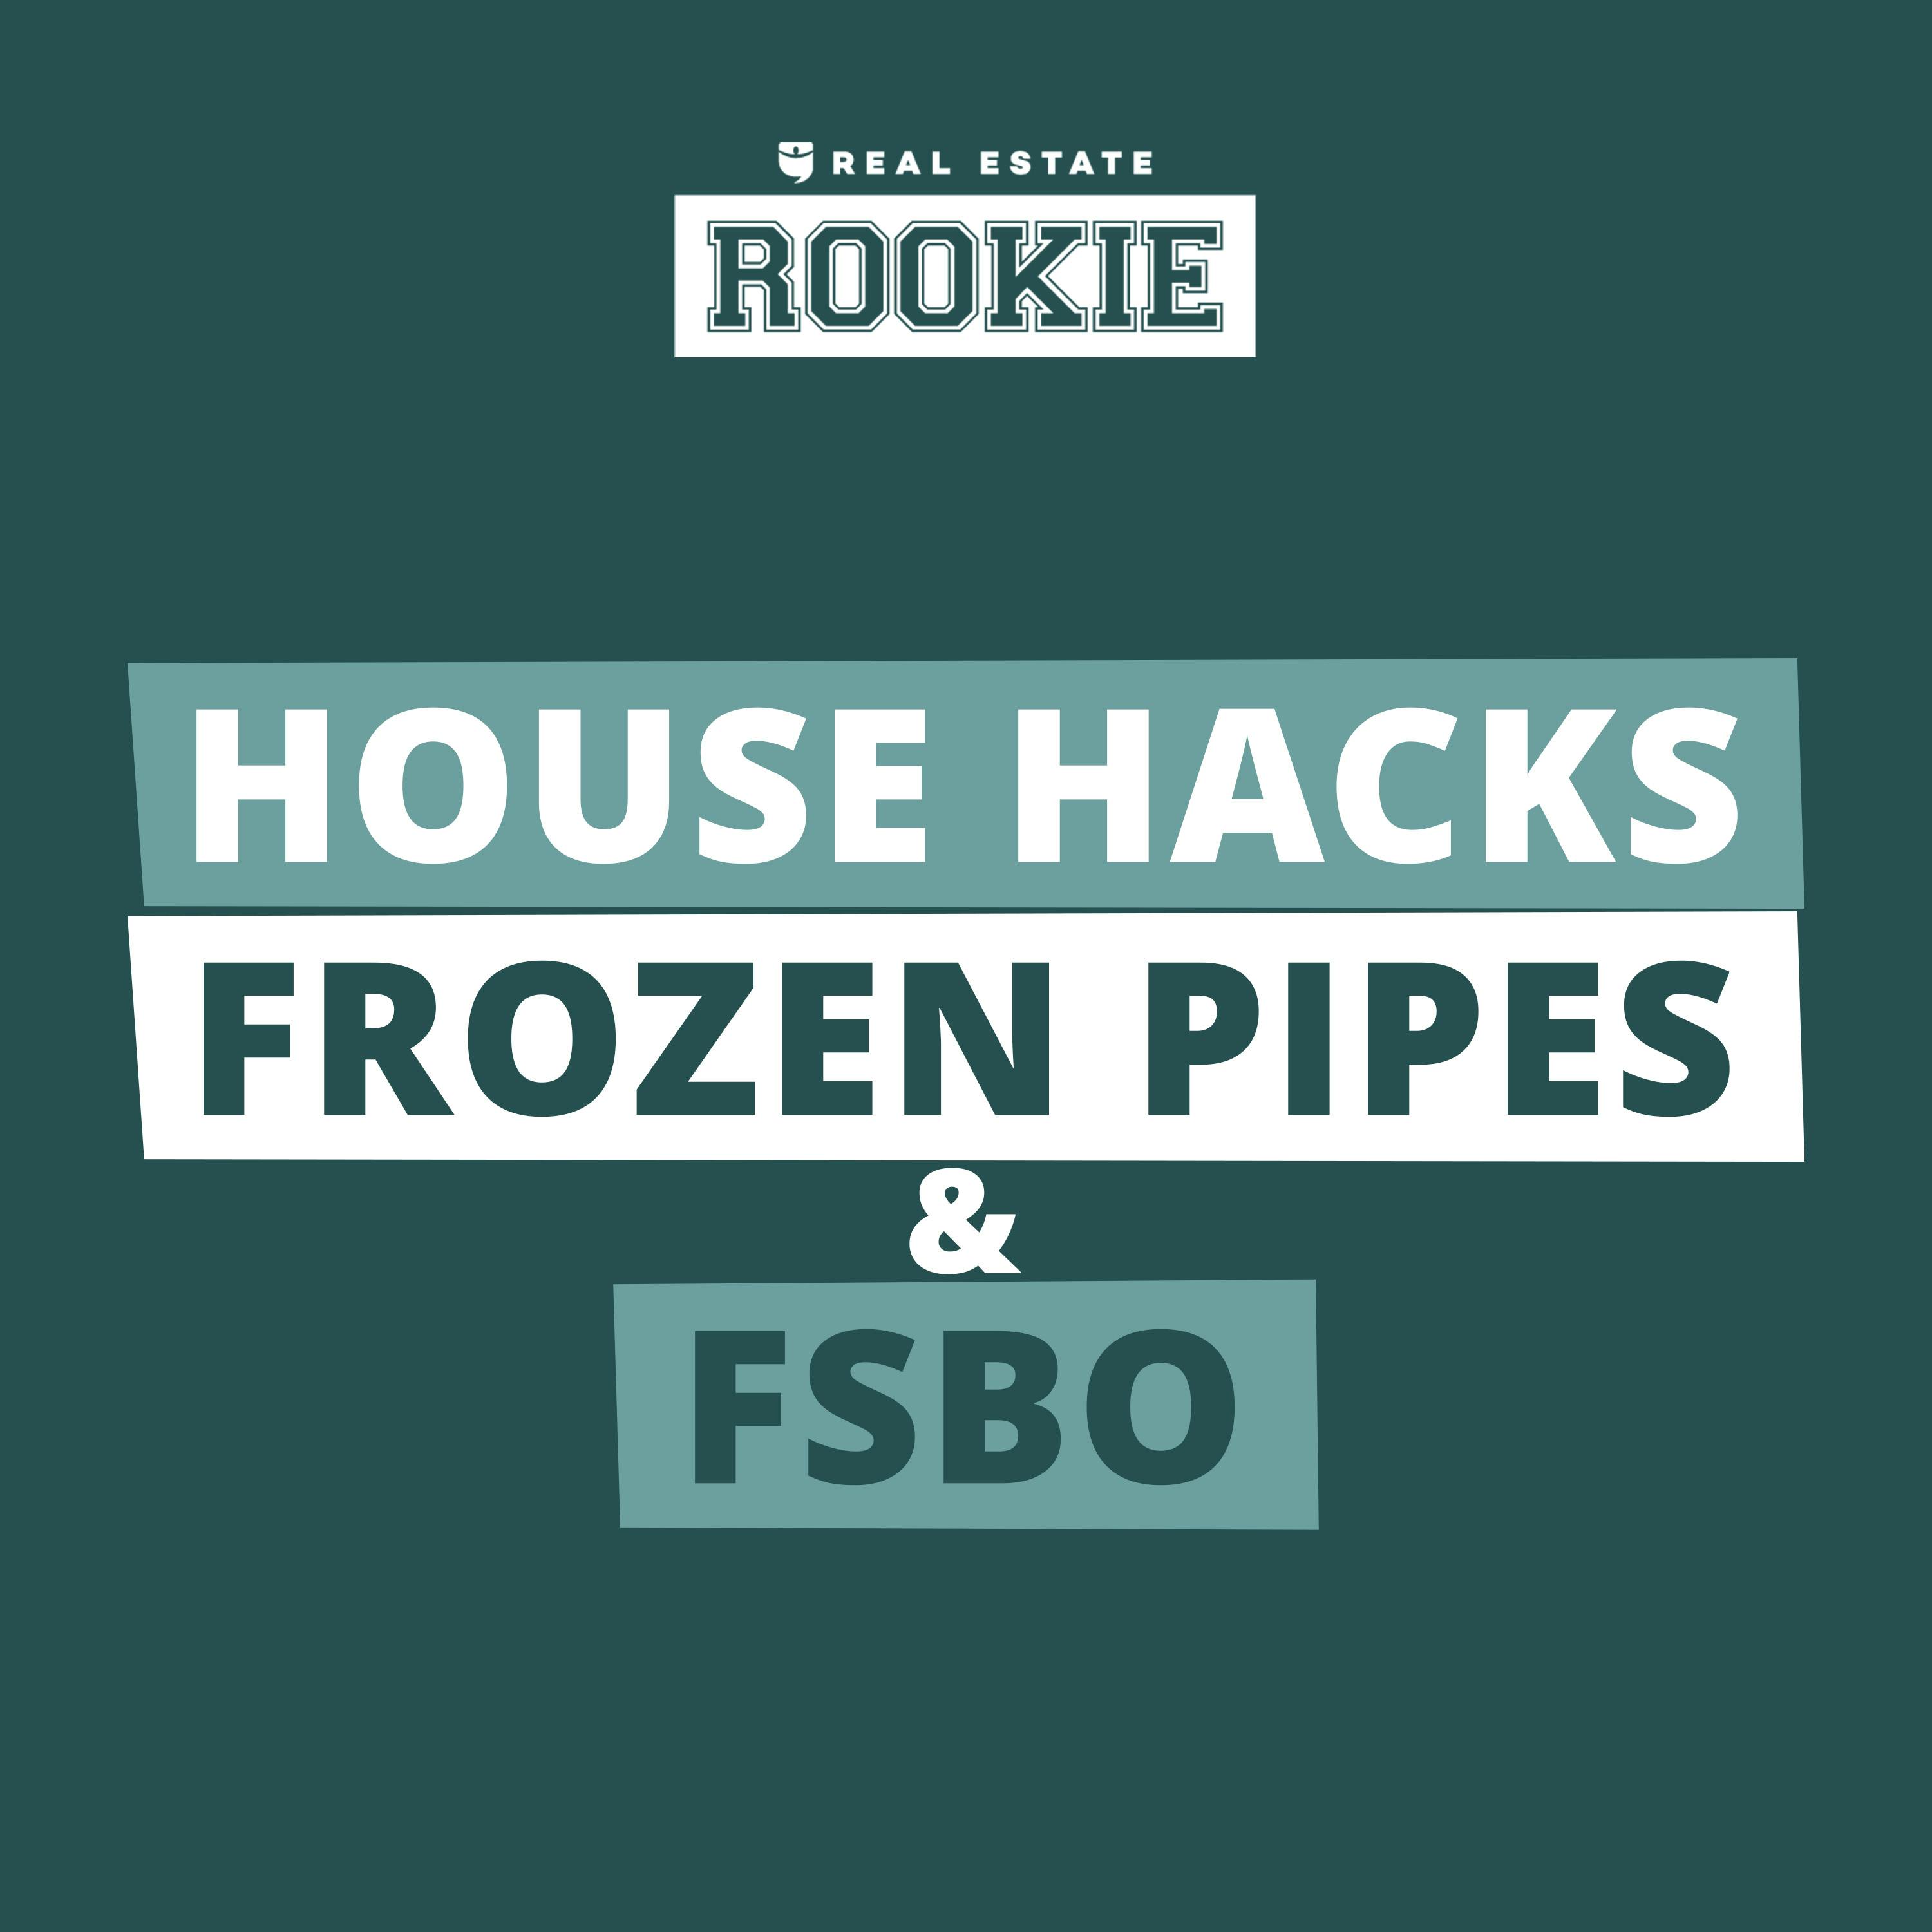 266: Rookie Reply: Unpermitted Renovations, House Hack Profits, and Frozen Pipes